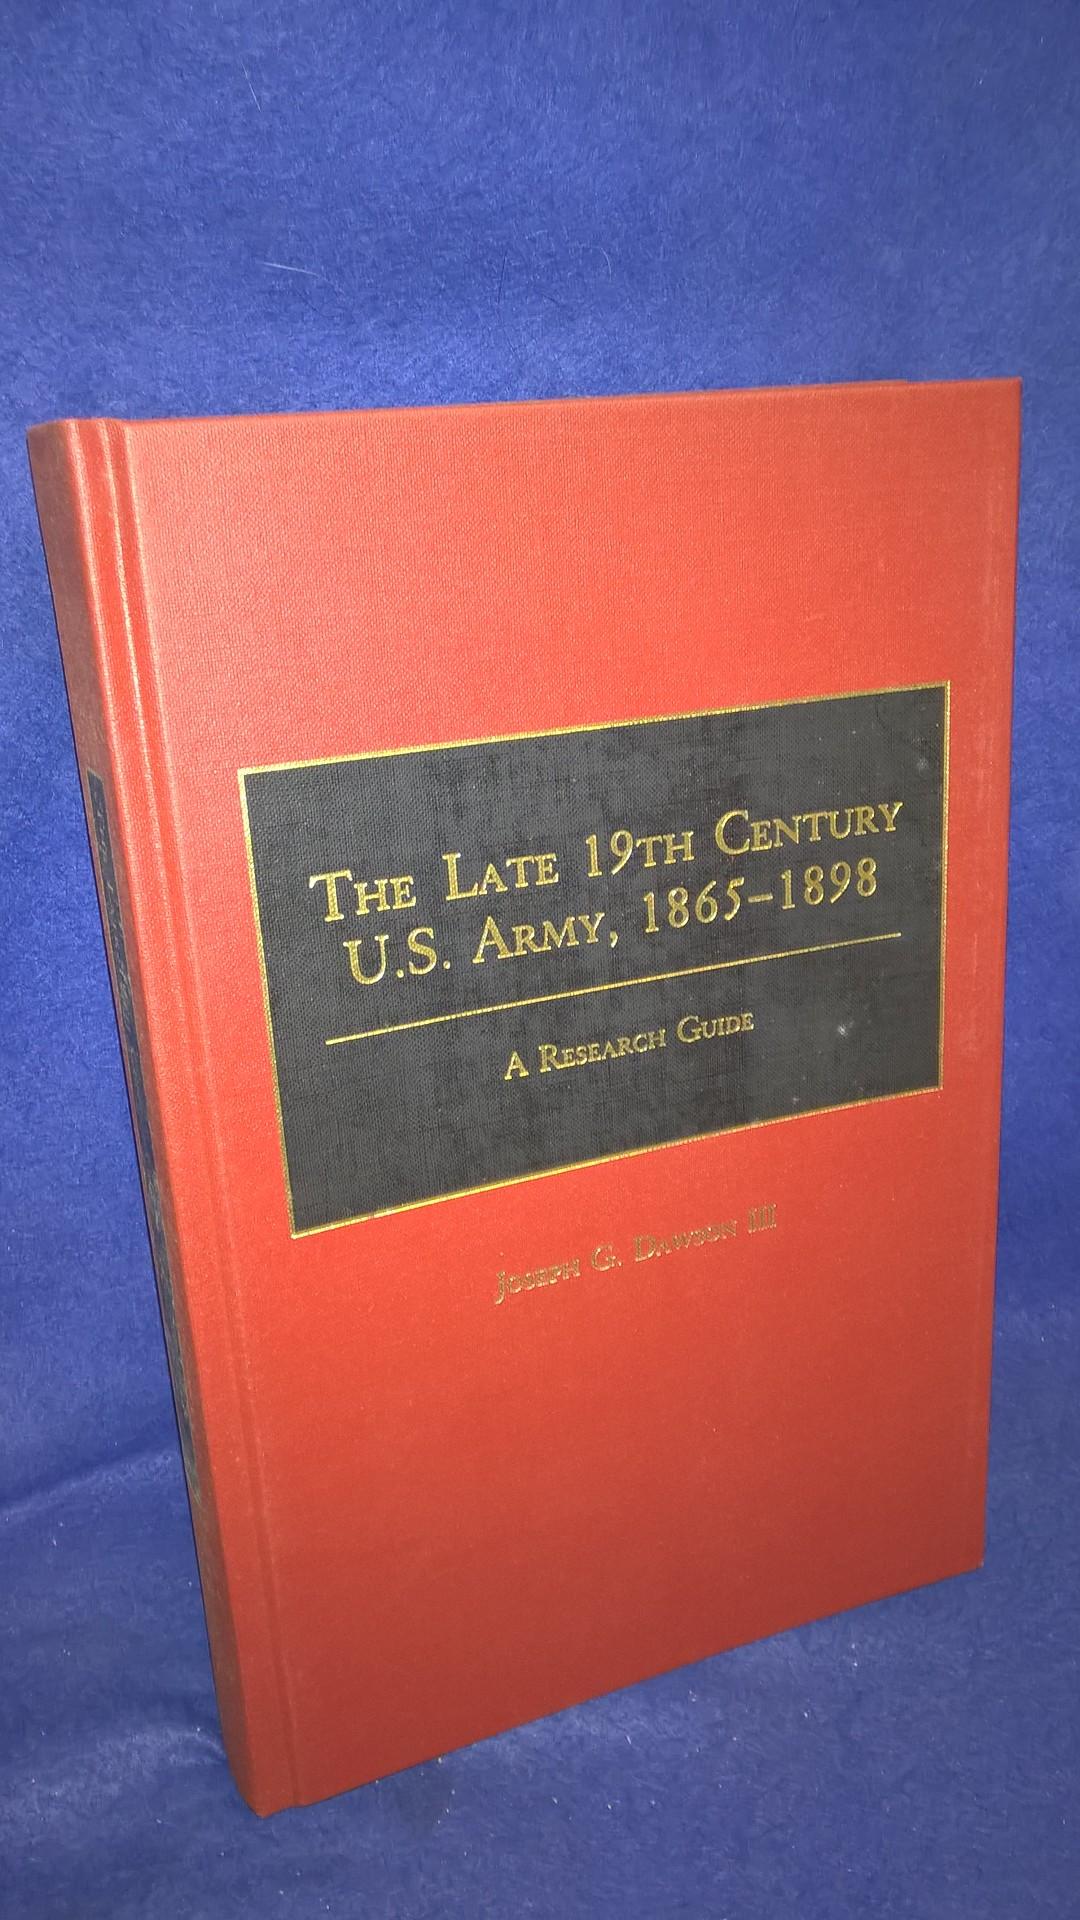 The Late 19th Century U.S. Army, 1865-1898: A Research Guide.